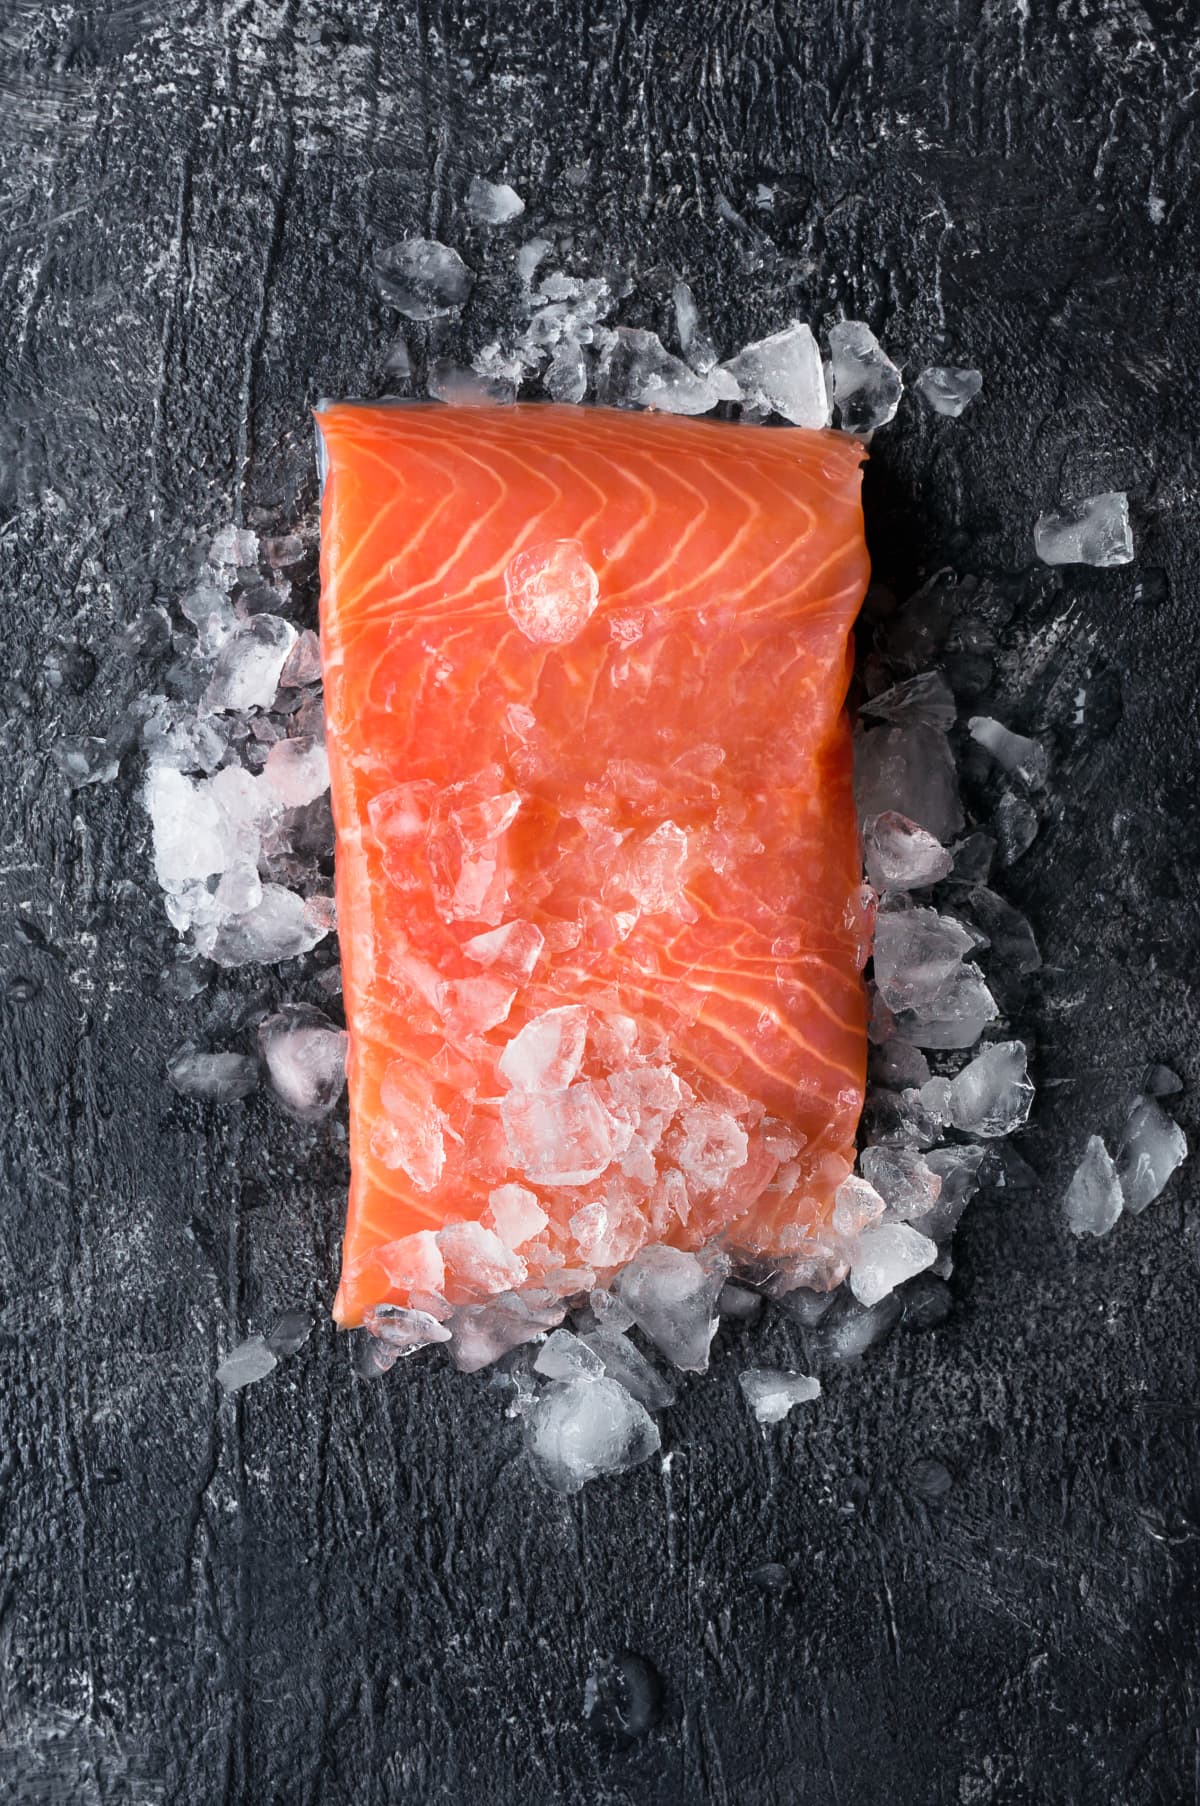 Raw salmon filet on a black surface with crushed ice